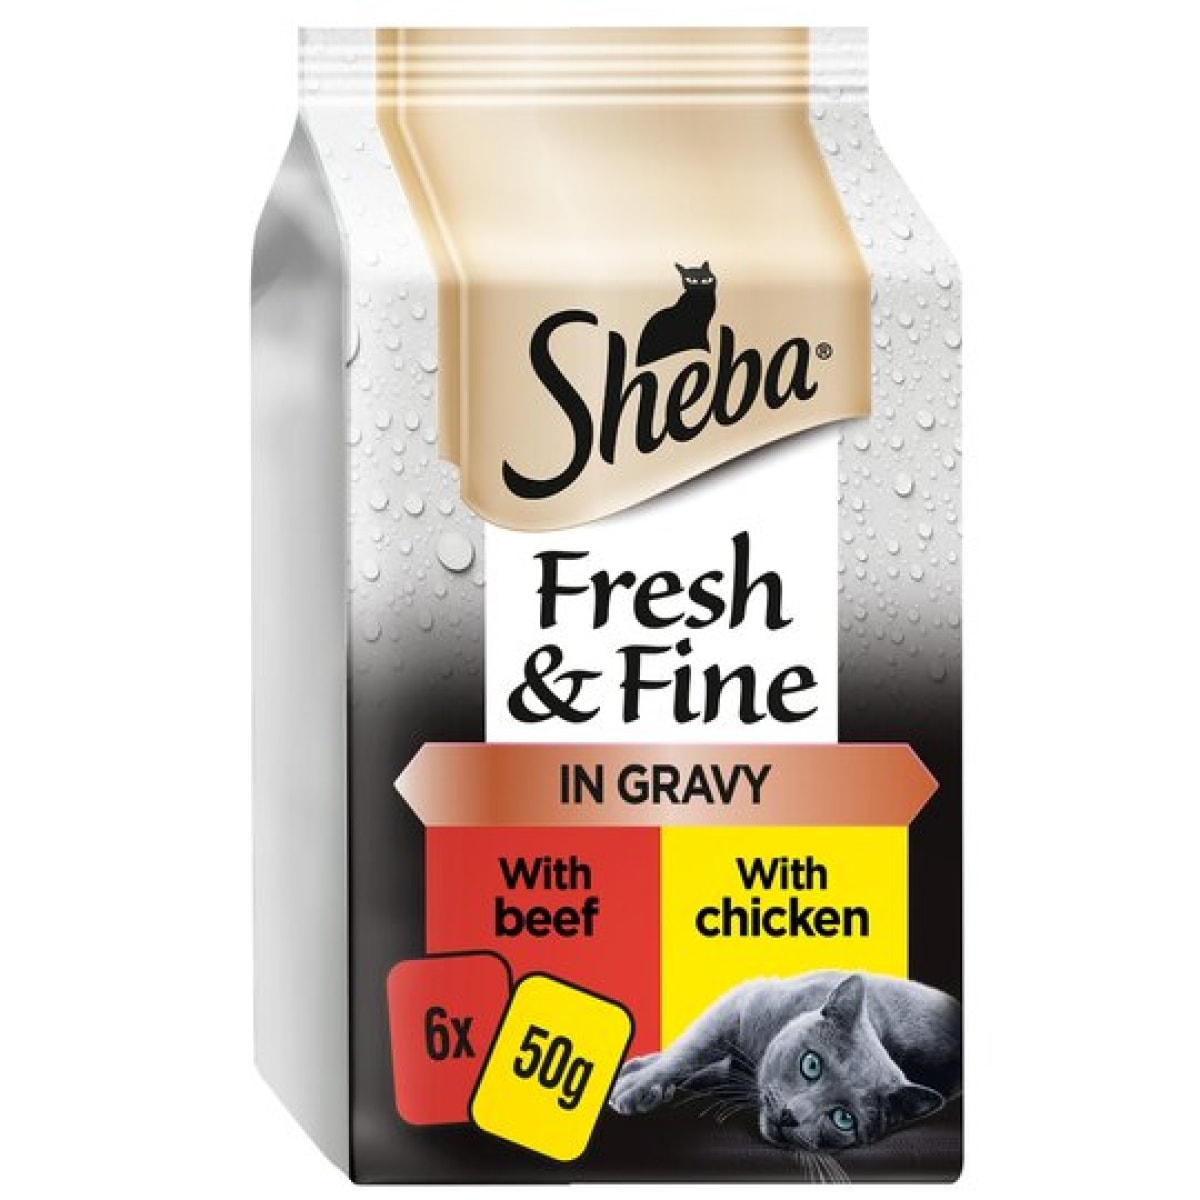 Sheba F&F in Gravy with Beef & with Chicken 6 x 50g Main Image